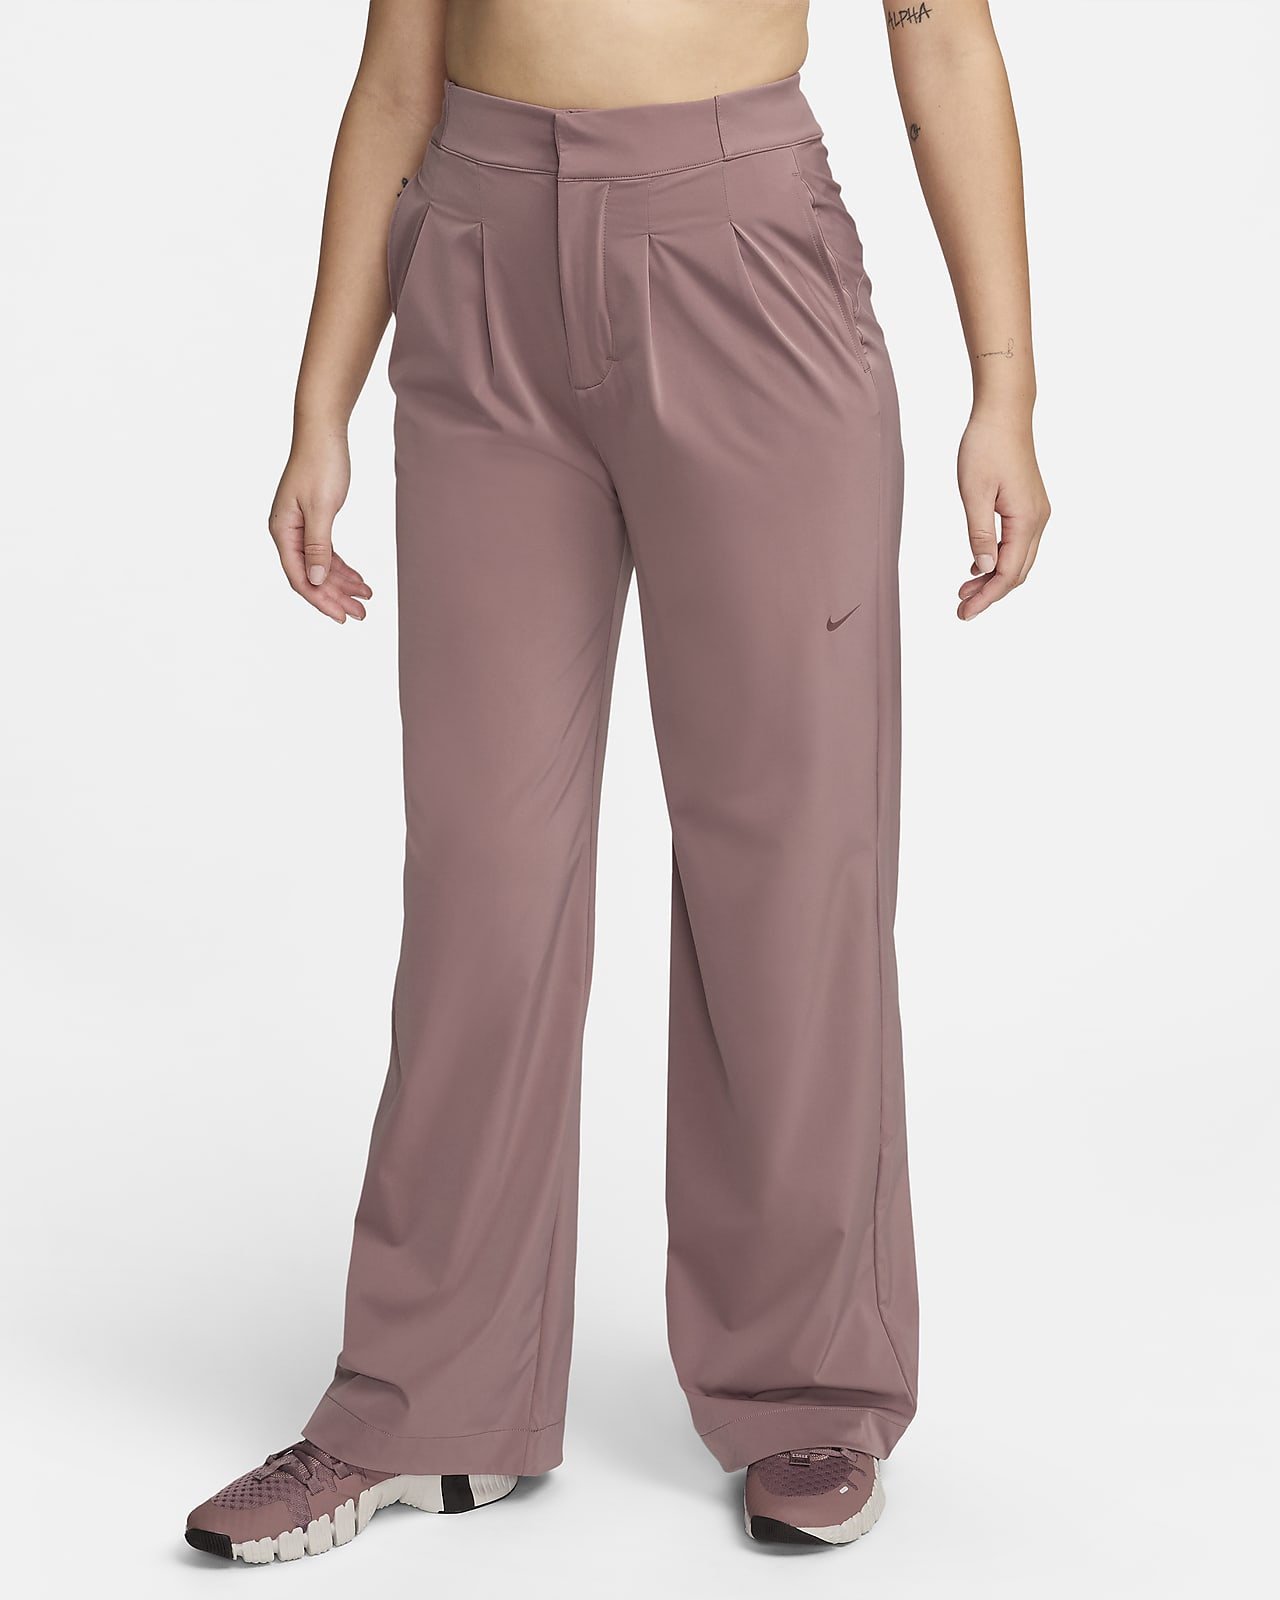 nike stretch pants trousers for women Latest Top Selling